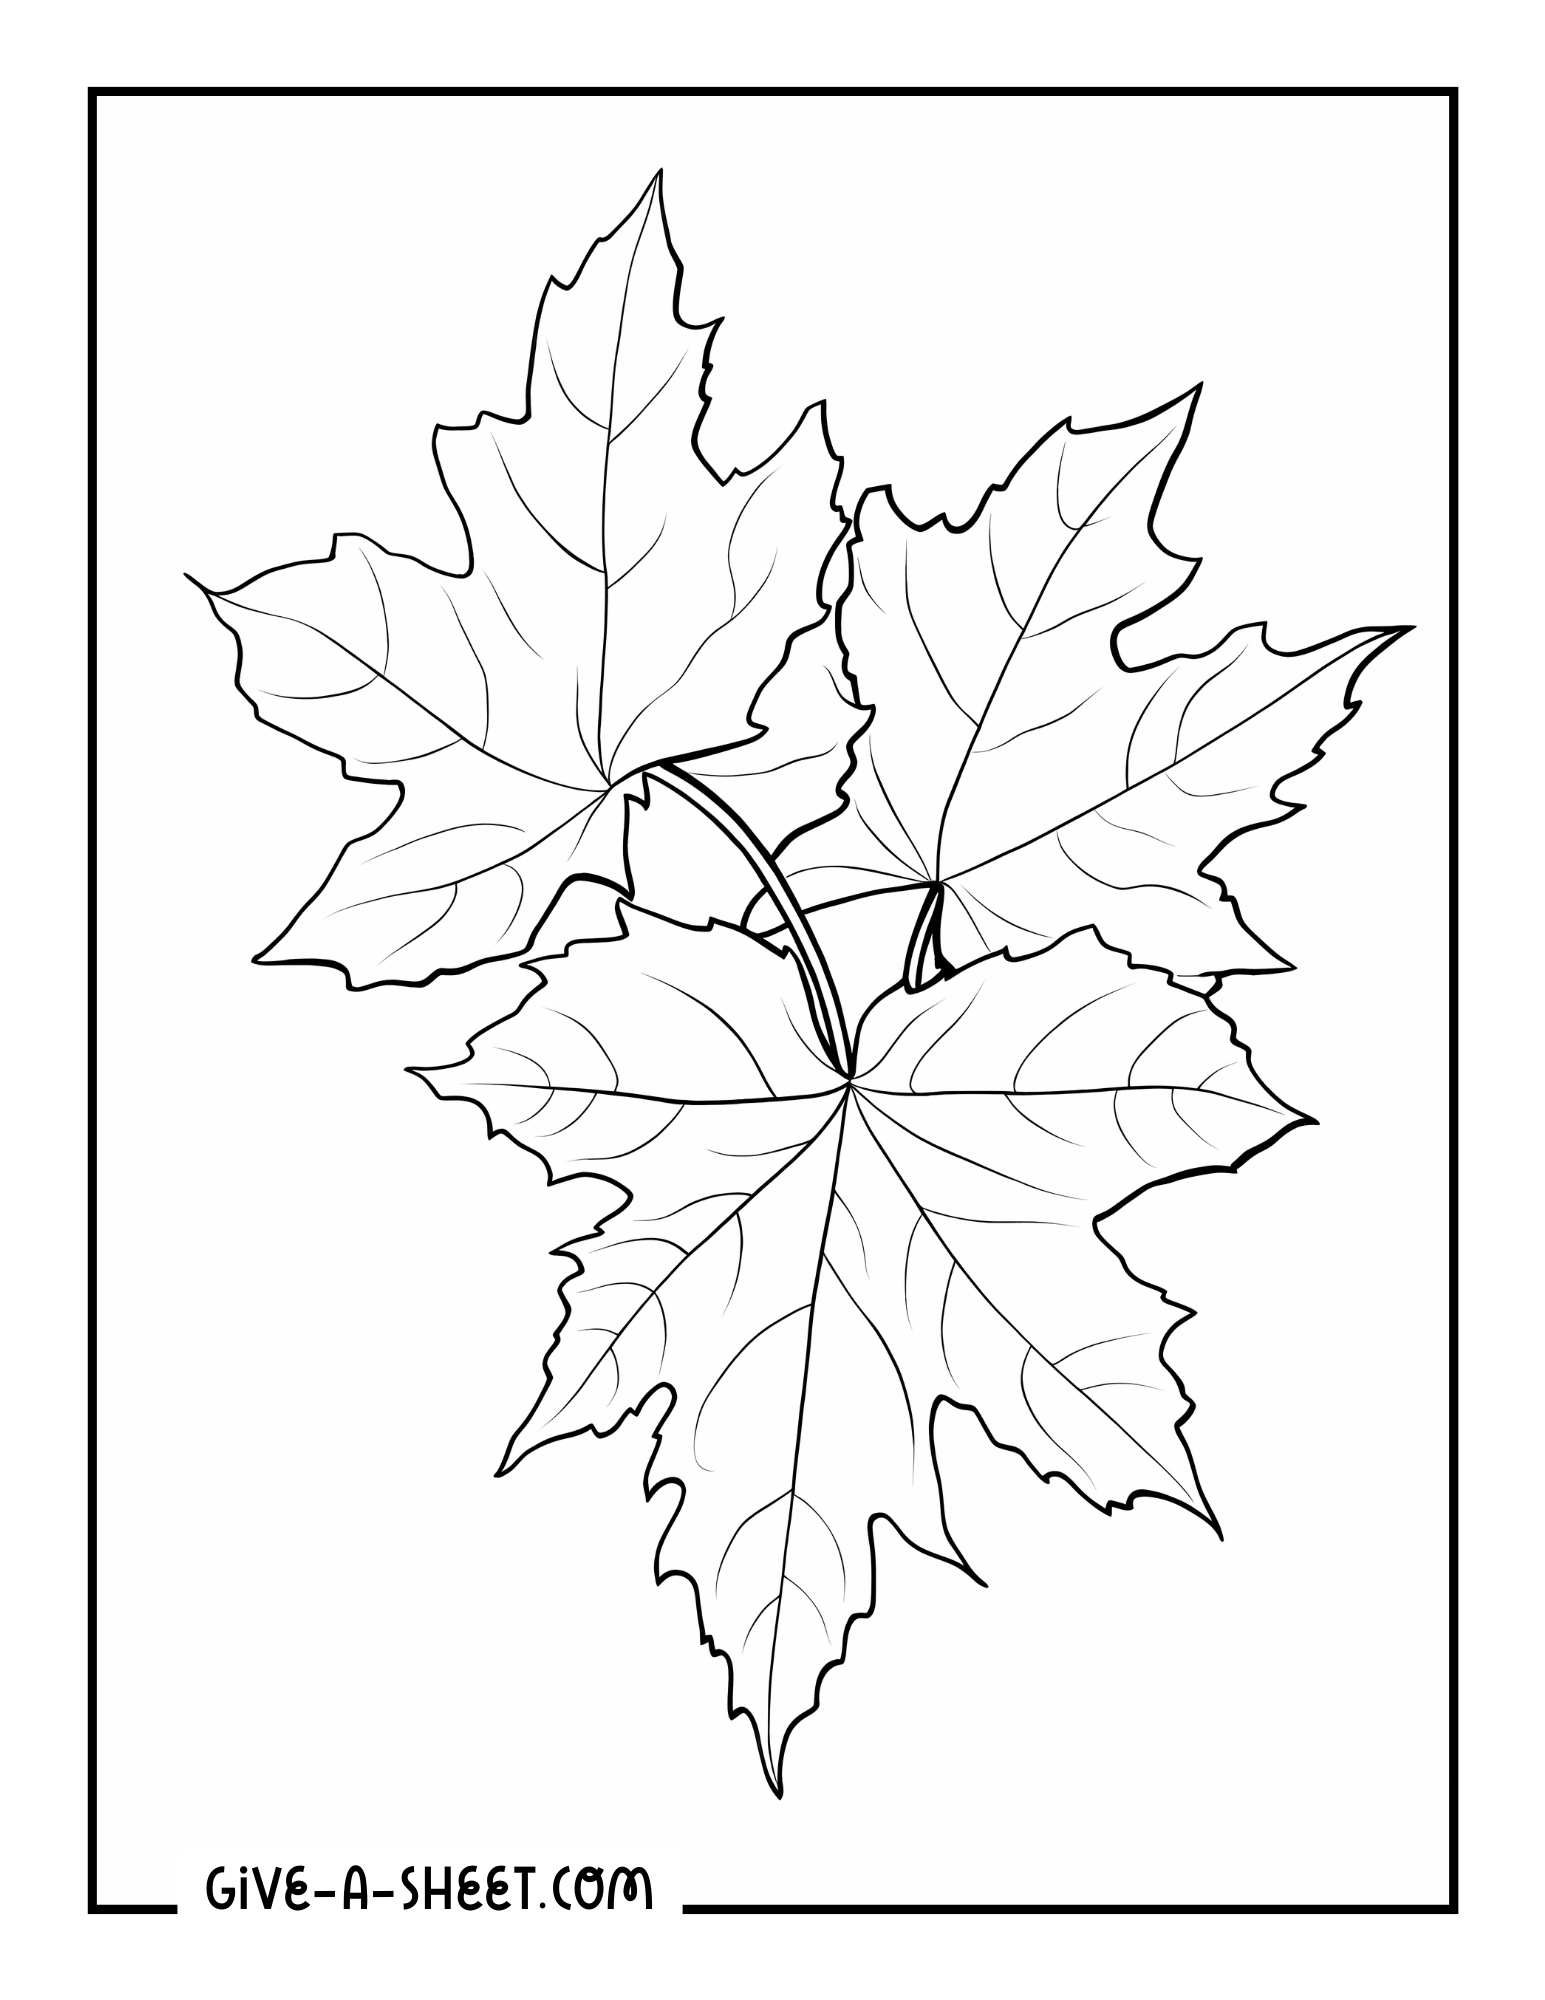 Maple free fall leaf coloring sheet.